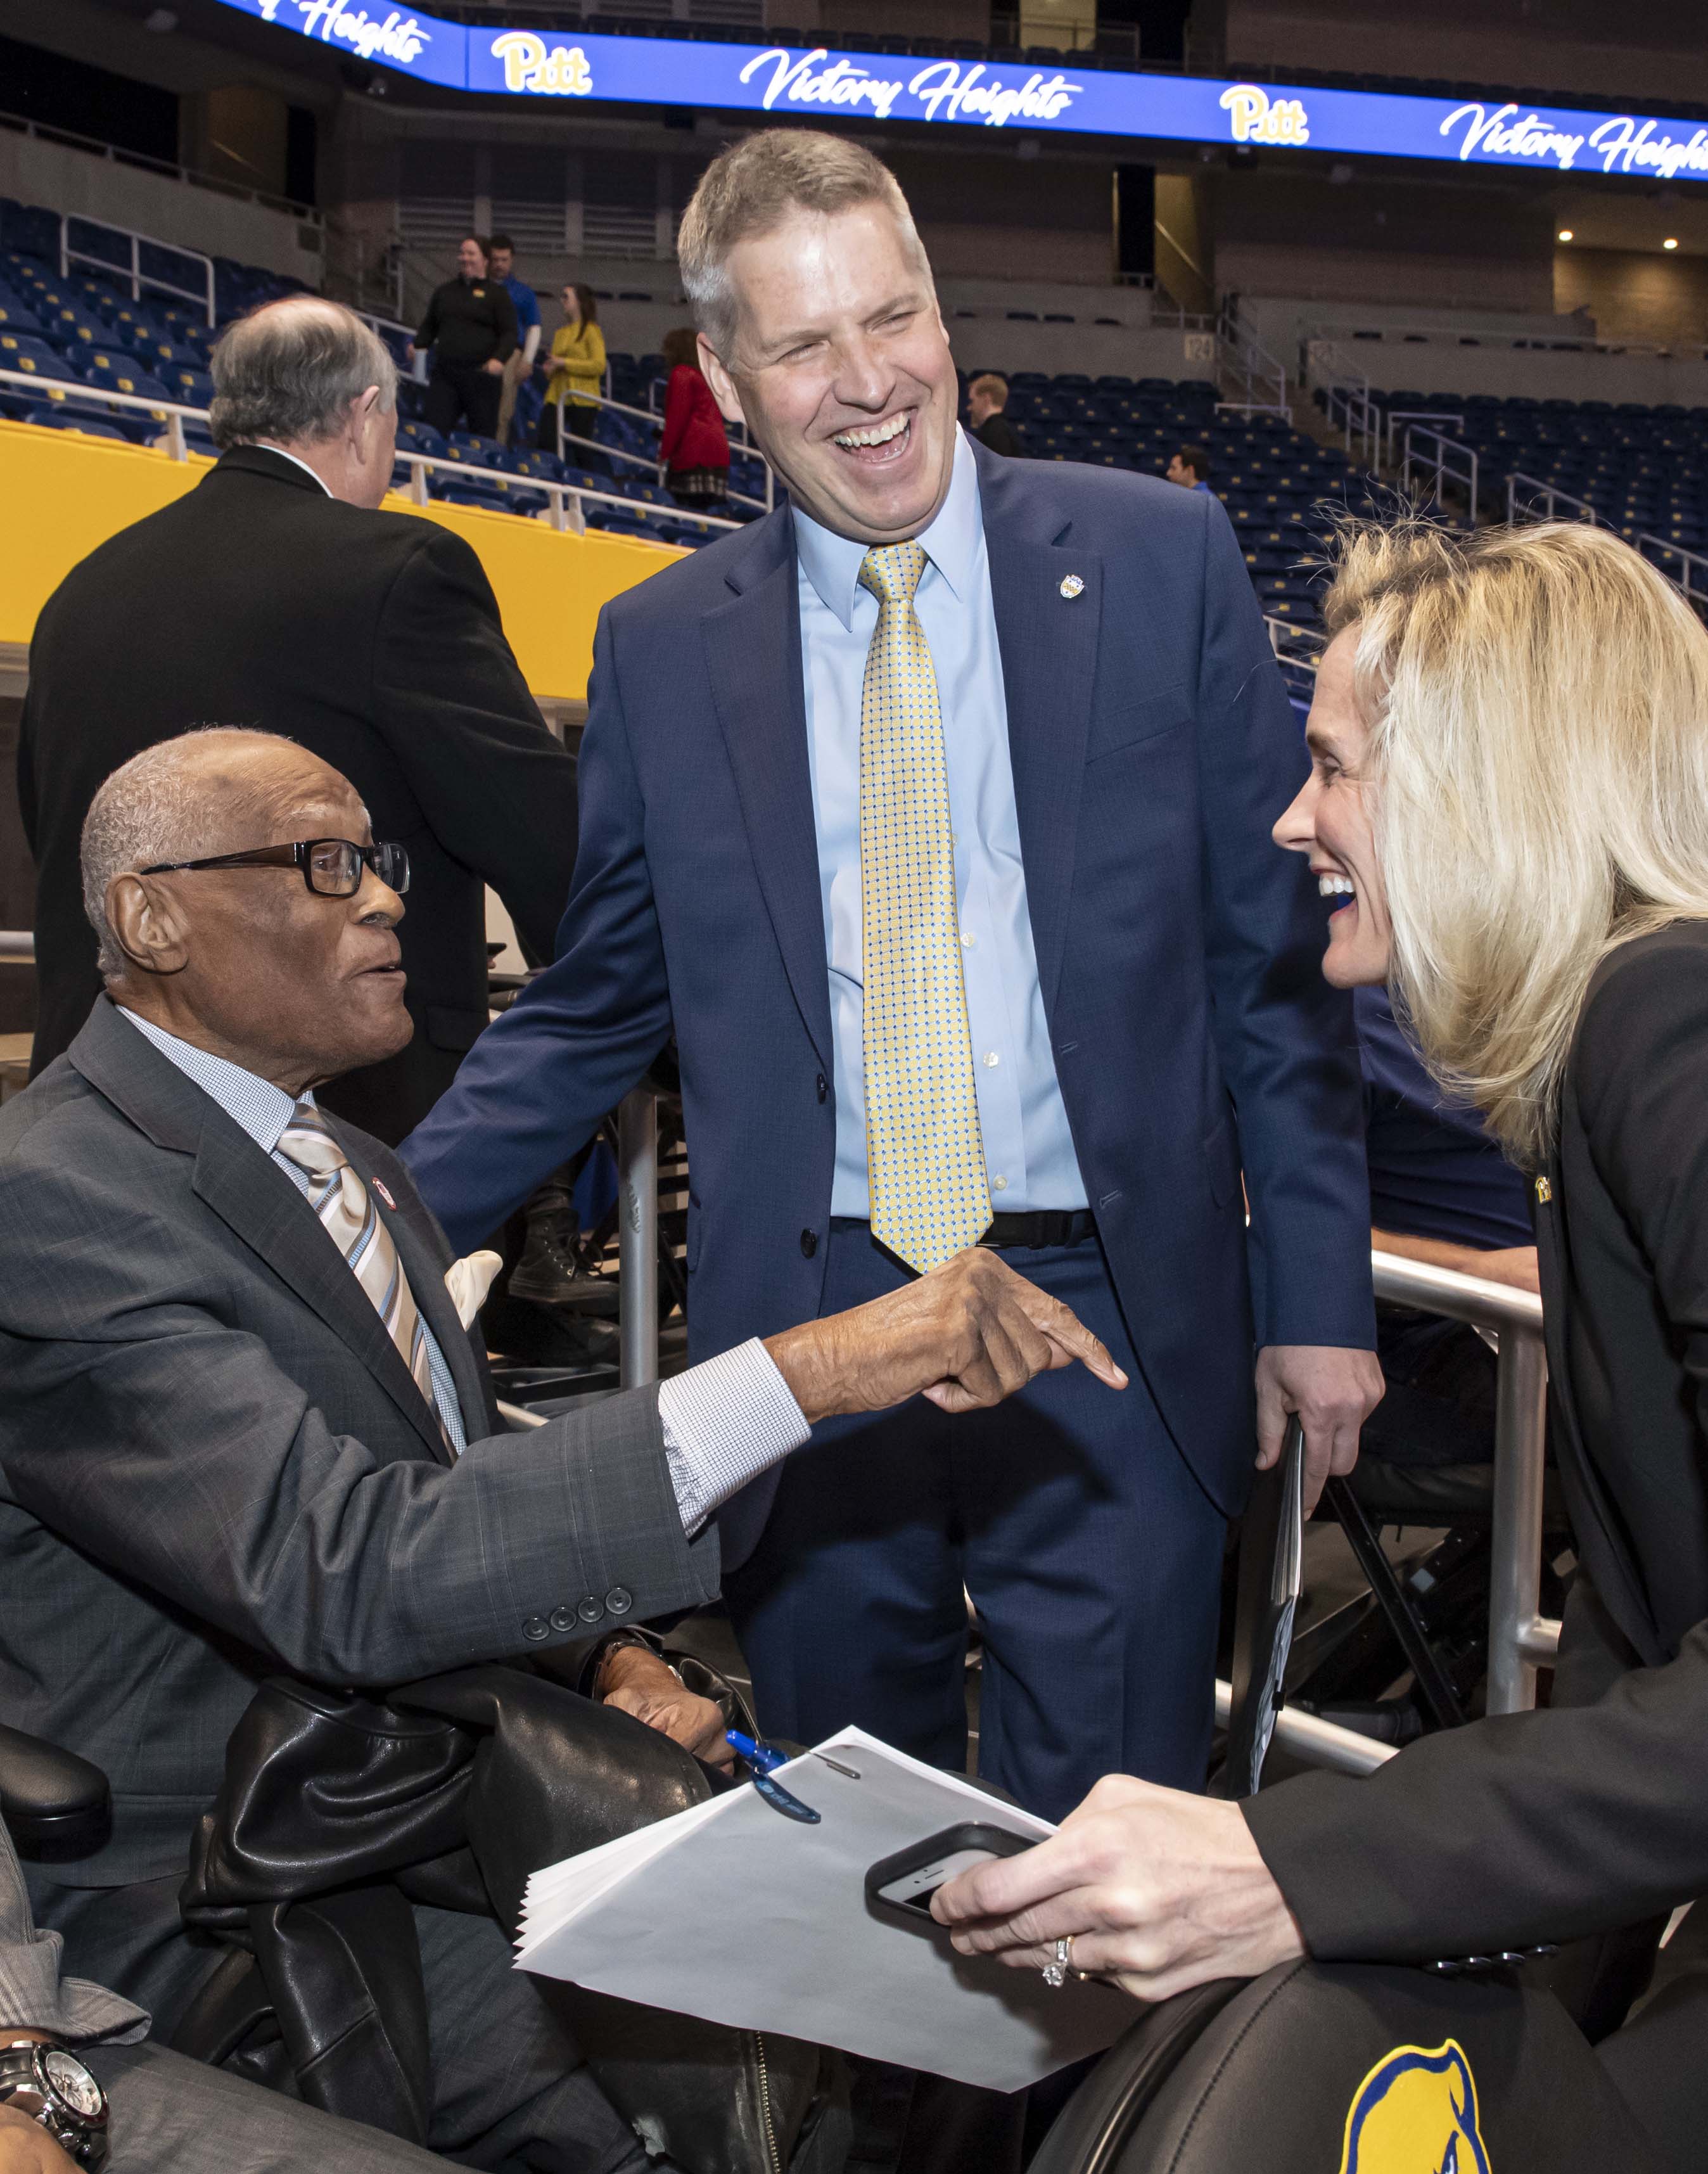 Herb Douglas, Chancellor Gallagher and Heather Lyke